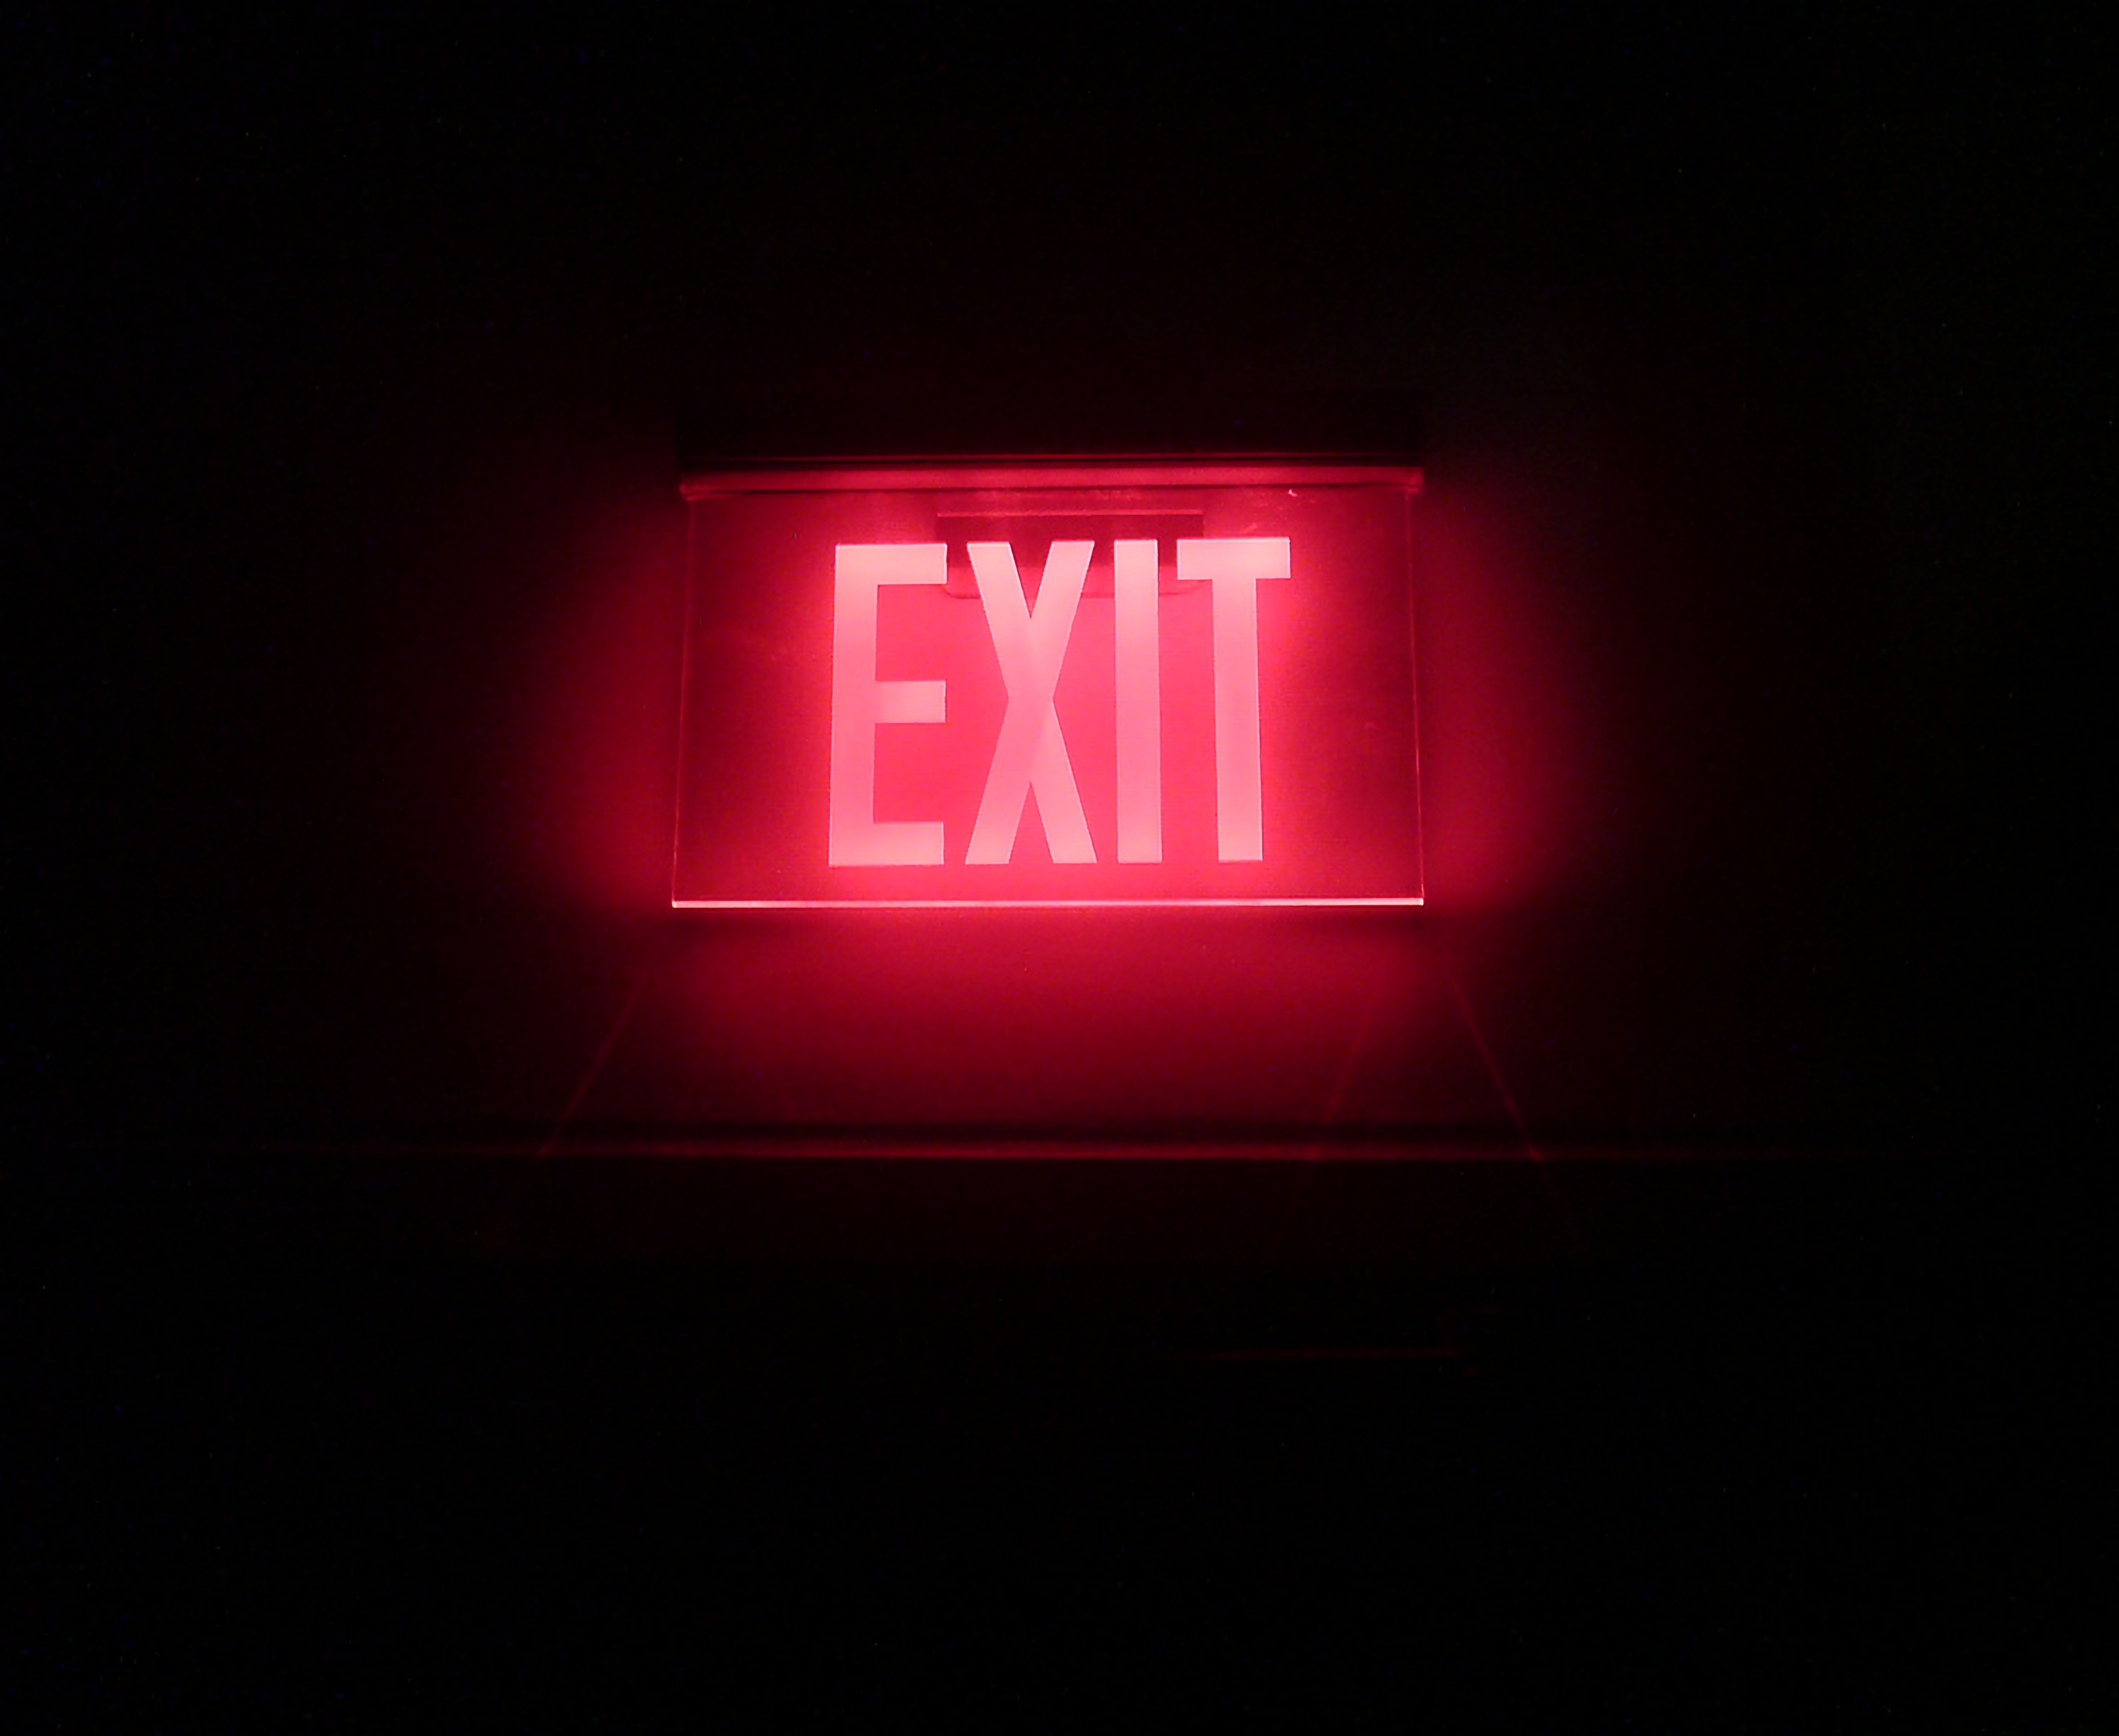 Best Exit wallpapers for phone screen